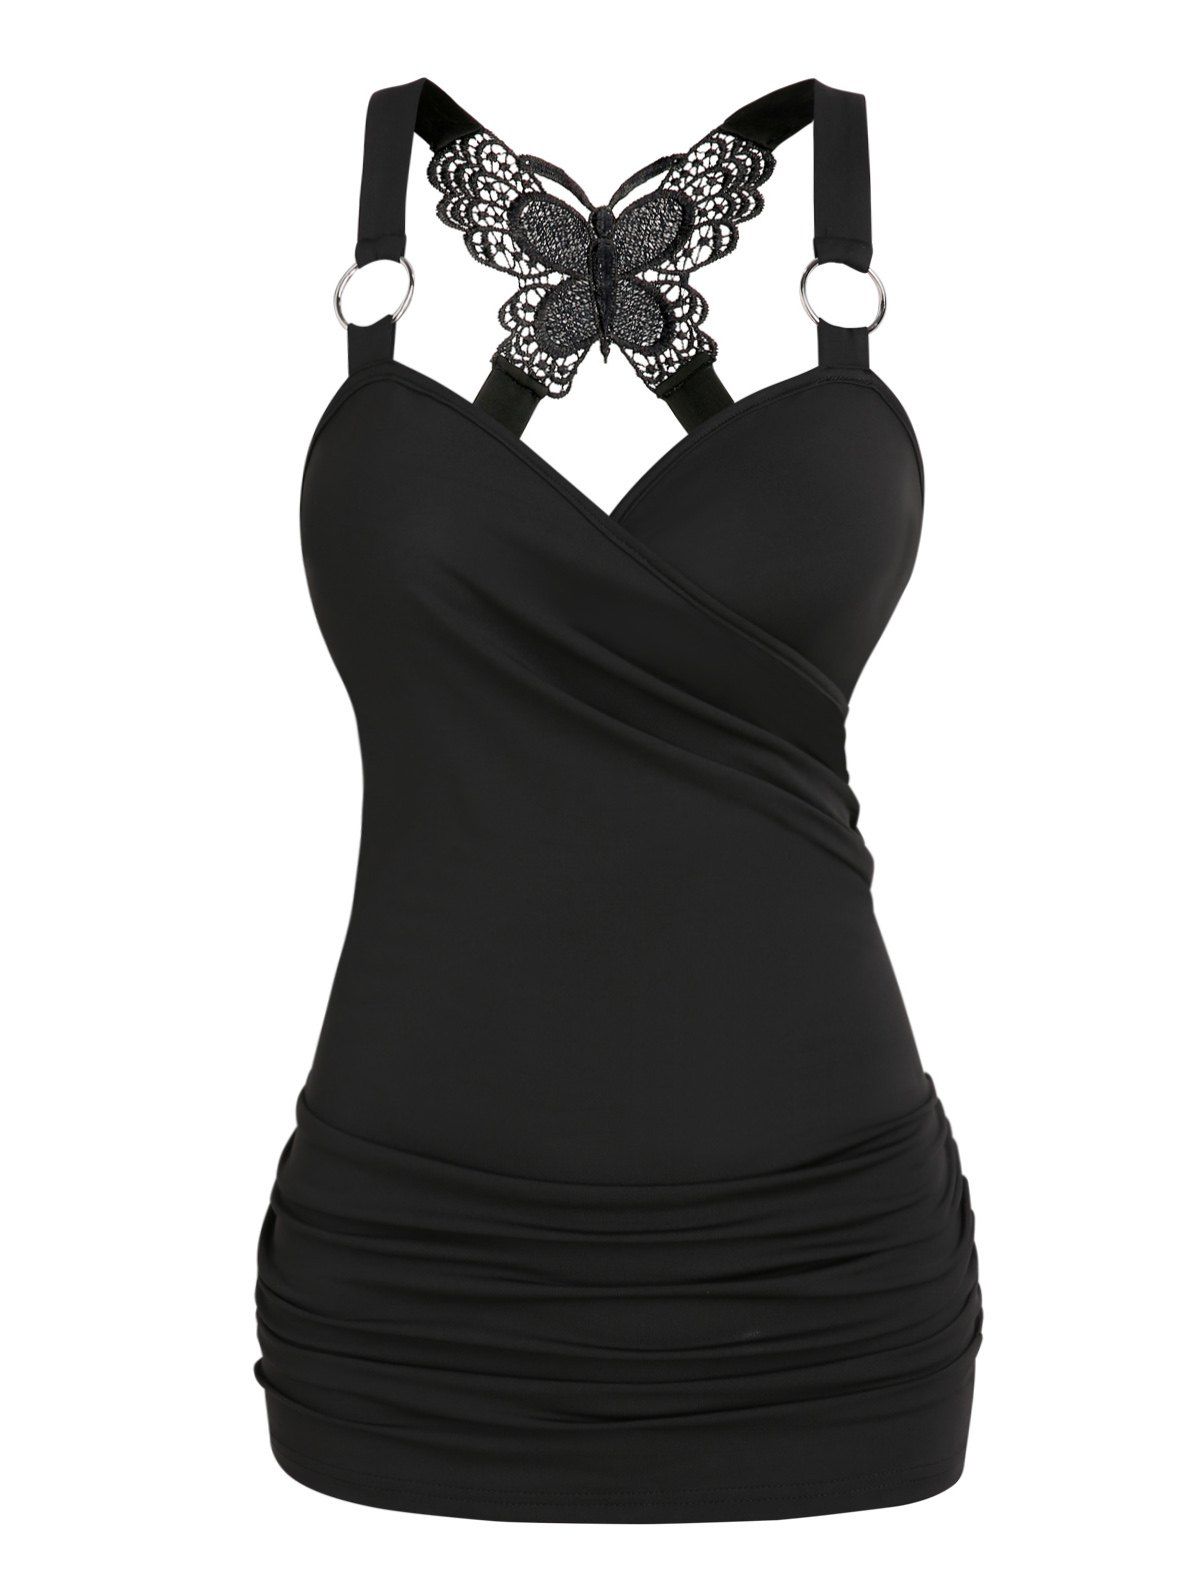 Gothic Tank Top Ruched Butterfly Lace Cross Tank Top O Ring Surplice Summer Top - BLACK L